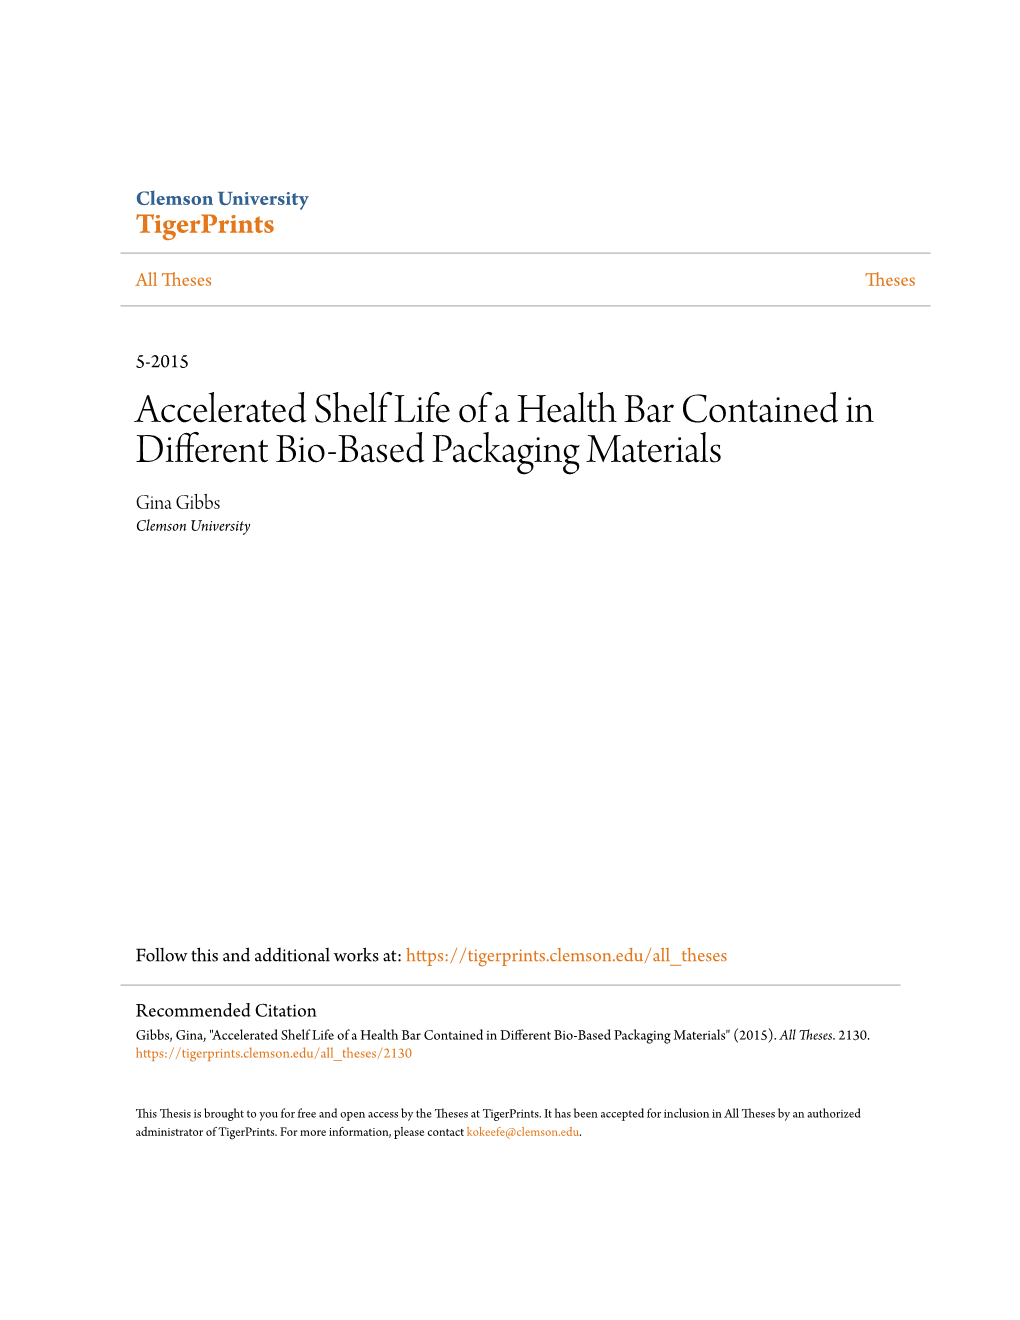 Accelerated Shelf Life of a Health Bar Contained in Different Bio-Based Packaging Materials Gina Gibbs Clemson University